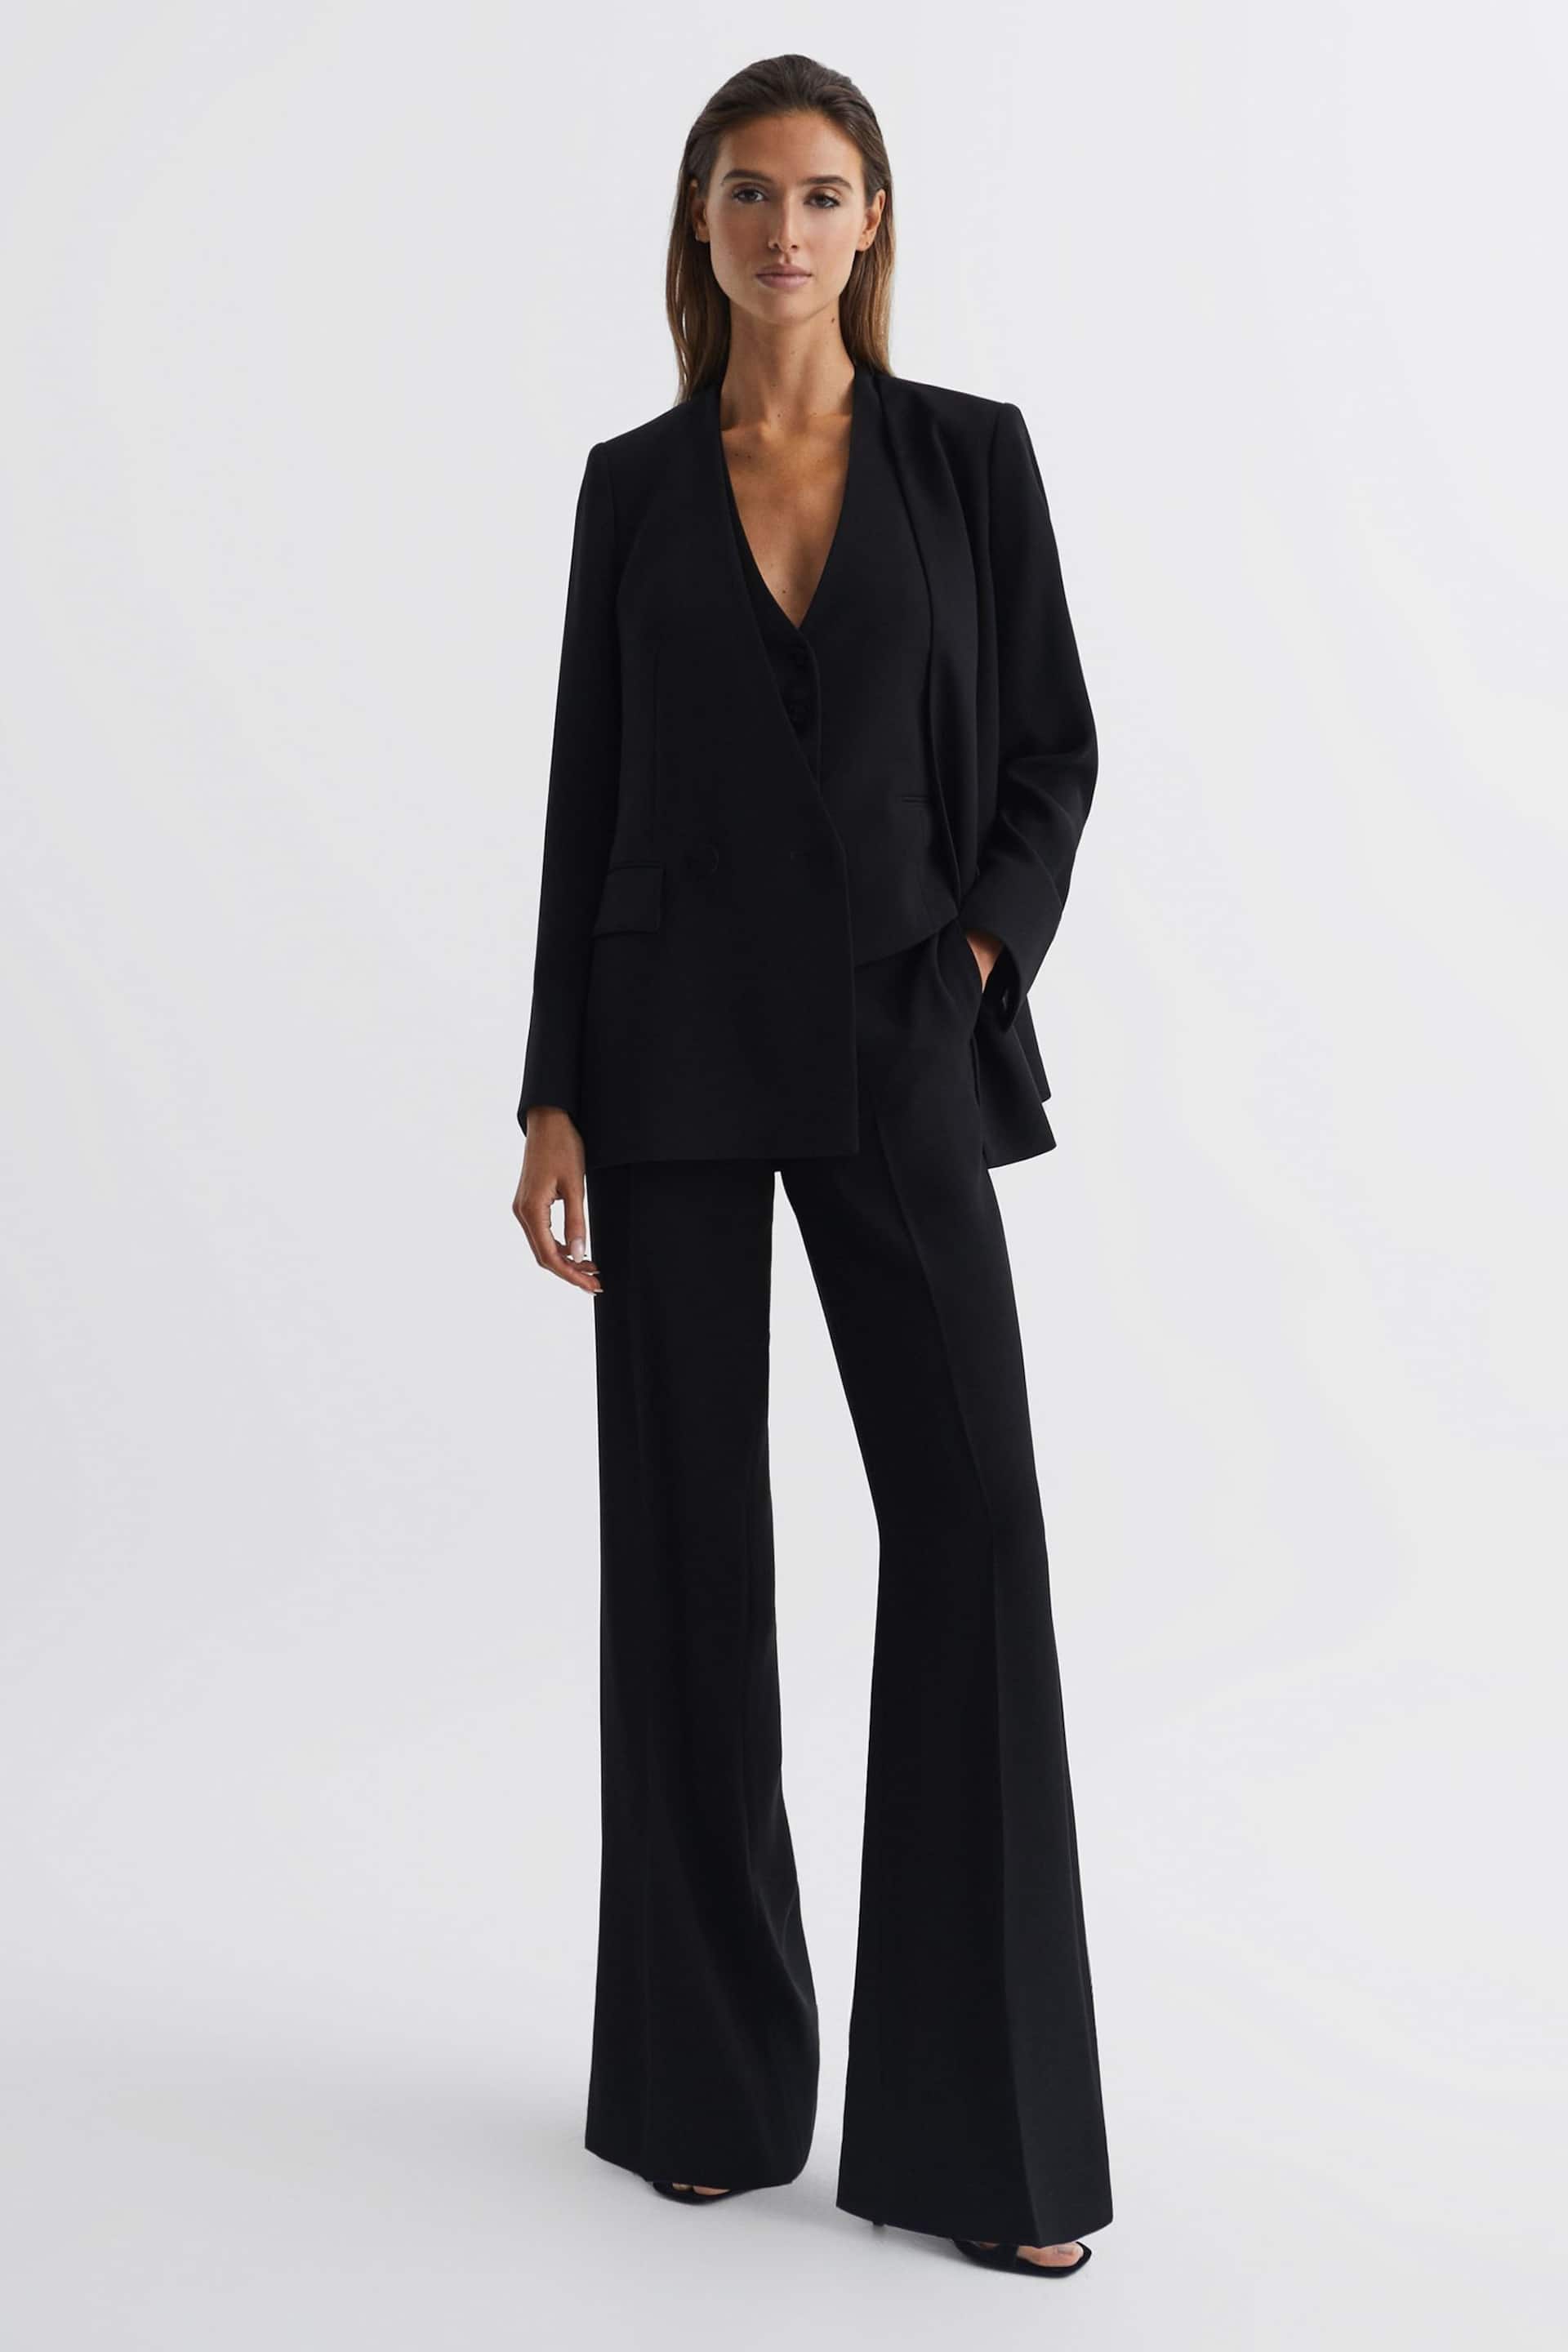 Reiss Black Margeaux Collarless Double Breasted Suit Blazer - Image 7 of 7